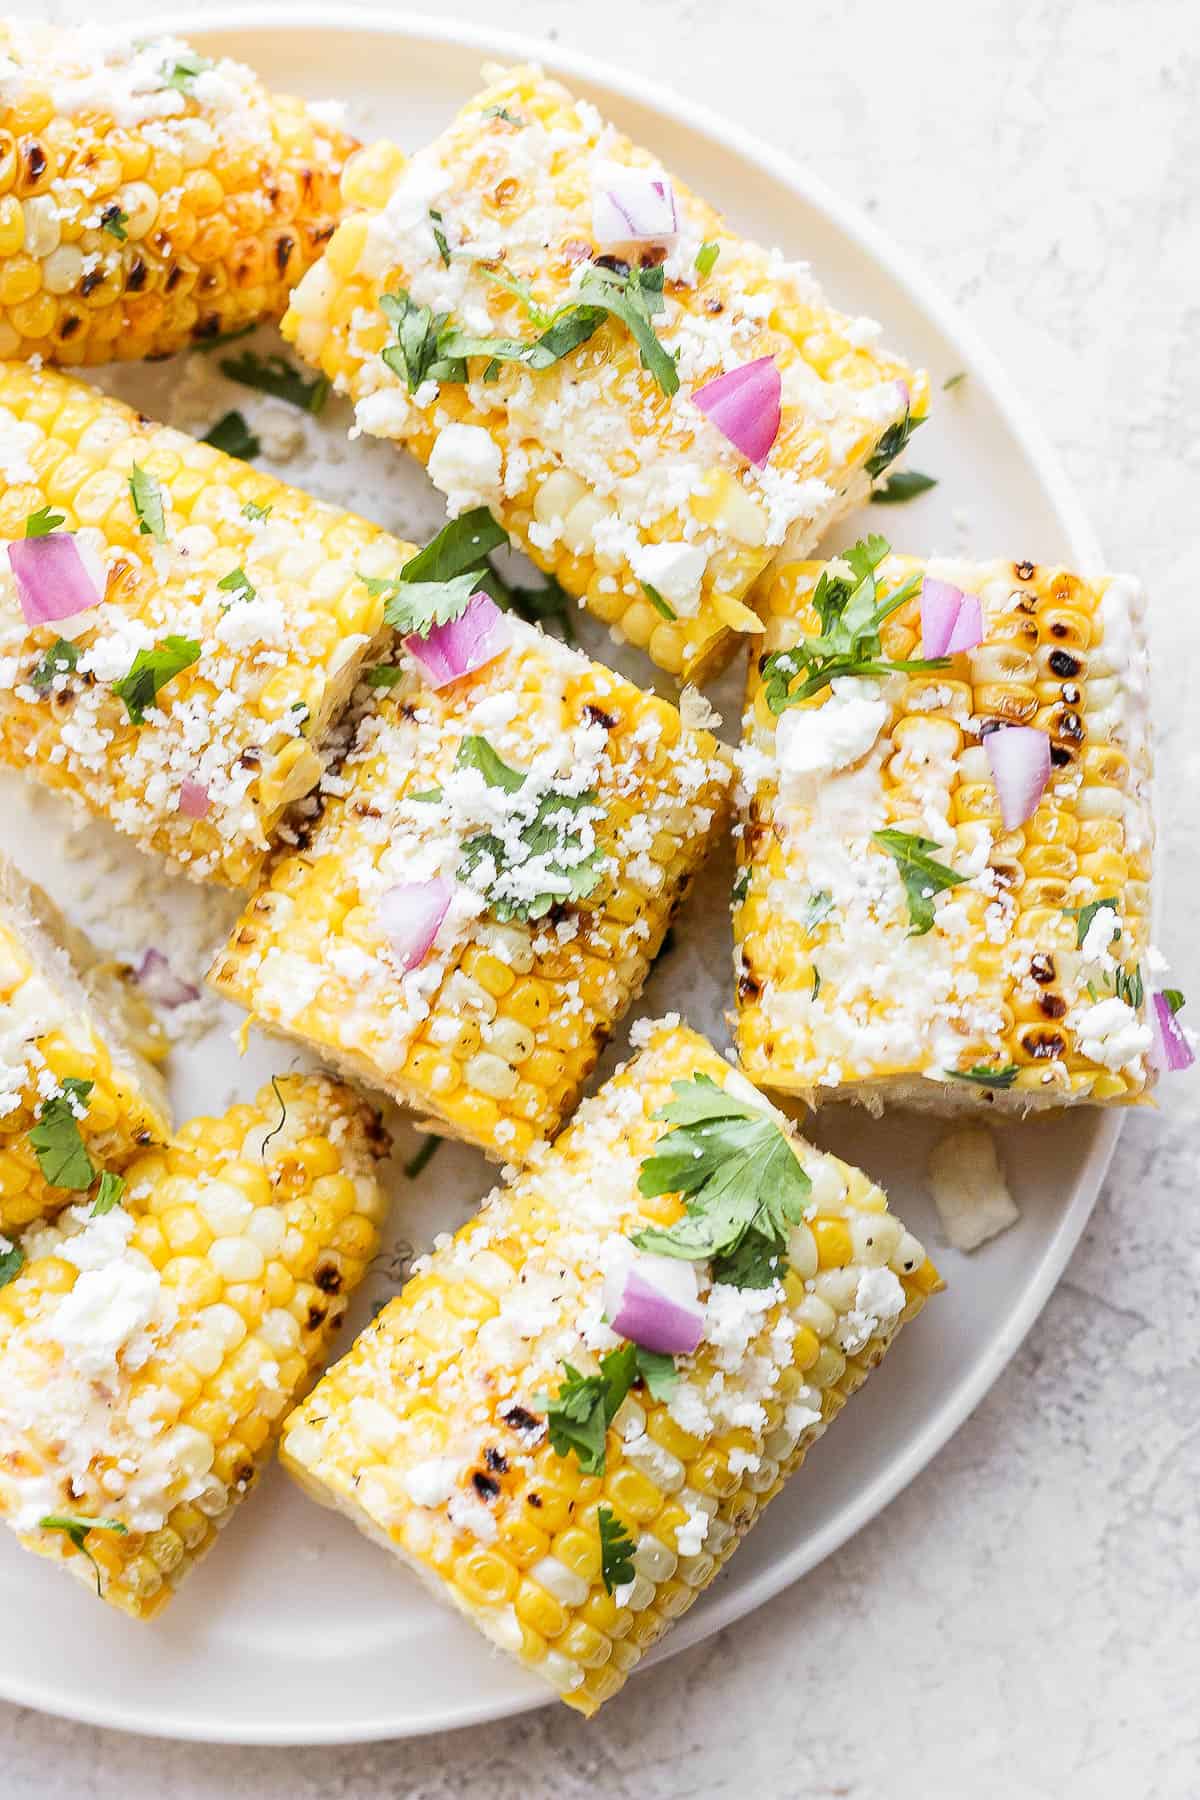 Mexican street corn cut into small cob pieces on a plate.